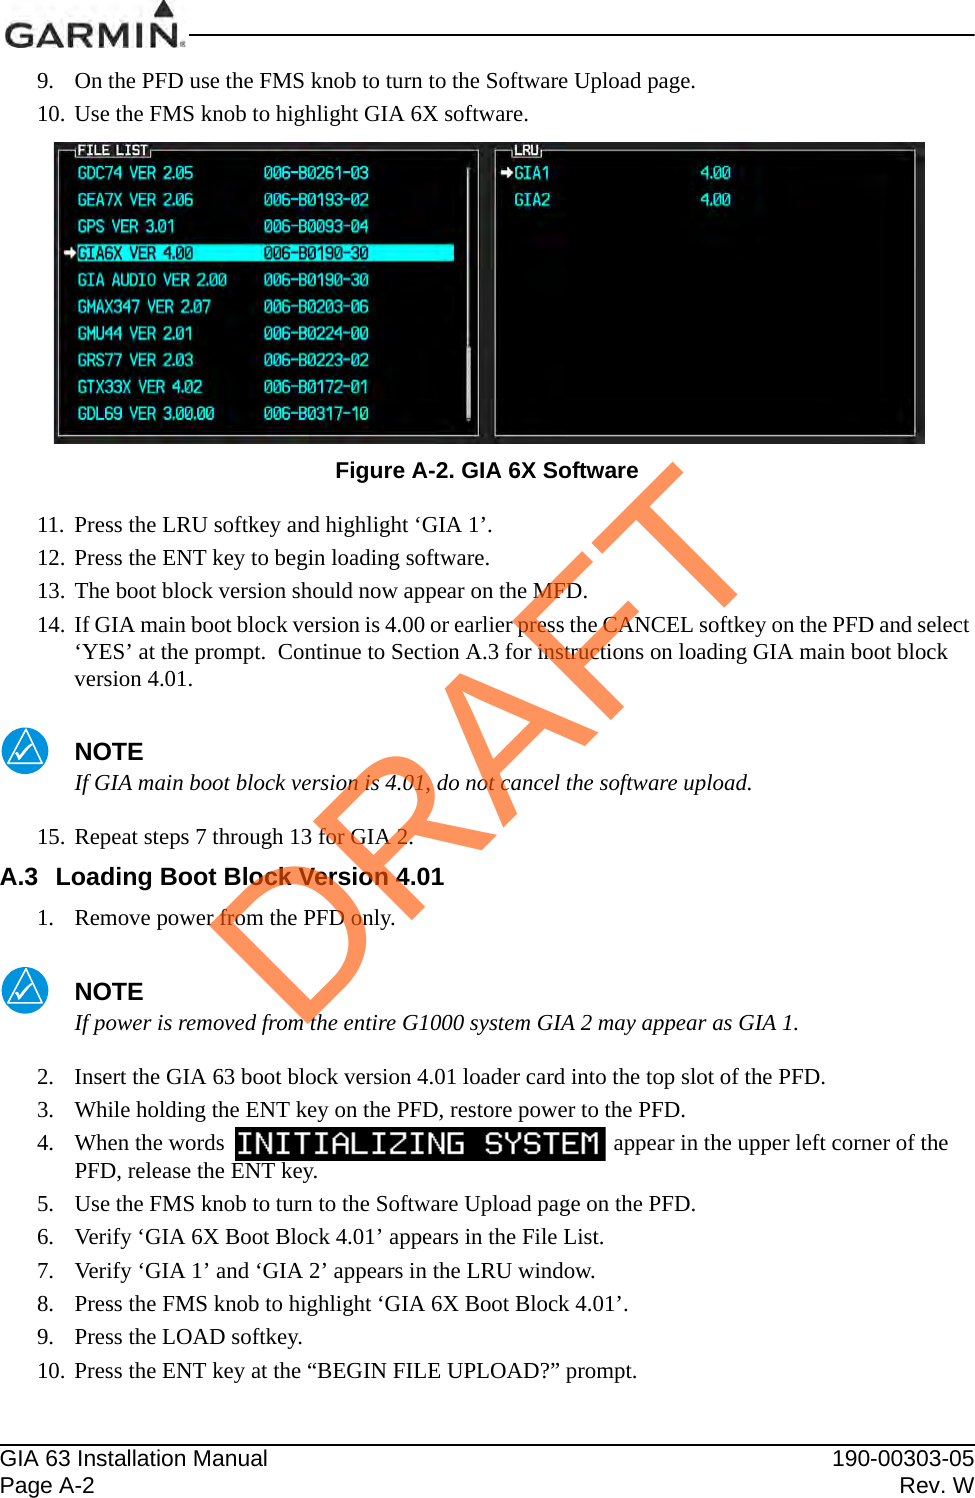 GIA 63 Installation Manual 190-00303-05Page A-2 Rev. W9. On the PFD use the FMS knob to turn to the Software Upload page.10. Use the FMS knob to highlight GIA 6X software.Figure A-2. GIA 6X Software11. Press the LRU softkey and highlight ‘GIA 1’.12. Press the ENT key to begin loading software.13. The boot block version should now appear on the MFD.14. If GIA main boot block version is 4.00 or earlier press the CANCEL softkey on the PFD and select ‘YES’ at the prompt.  Continue to Section A.3 for instructions on loading GIA main boot block version 4.01.NOTEIf GIA main boot block version is 4.01, do not cancel the software upload.15. Repeat steps 7 through 13 for GIA 2.A.3 Loading Boot Block Version 4.011. Remove power from the PFD only.NOTEIf power is removed from the entire G1000 system GIA 2 may appear as GIA 1.2. Insert the GIA 63 boot block version 4.01 loader card into the top slot of the PFD.3. While holding the ENT key on the PFD, restore power to the PFD.4. When the words                                                                    appear in the upper left corner of the PFD, release the ENT key.5. Use the FMS knob to turn to the Software Upload page on the PFD.6. Verify ‘GIA 6X Boot Block 4.01’ appears in the File List.7. Verify ‘GIA 1’ and ‘GIA 2’ appears in the LRU window.8. Press the FMS knob to highlight ‘GIA 6X Boot Block 4.01’.9. Press the LOAD softkey.10. Press the ENT key at the “BEGIN FILE UPLOAD?” prompt.DRAFT